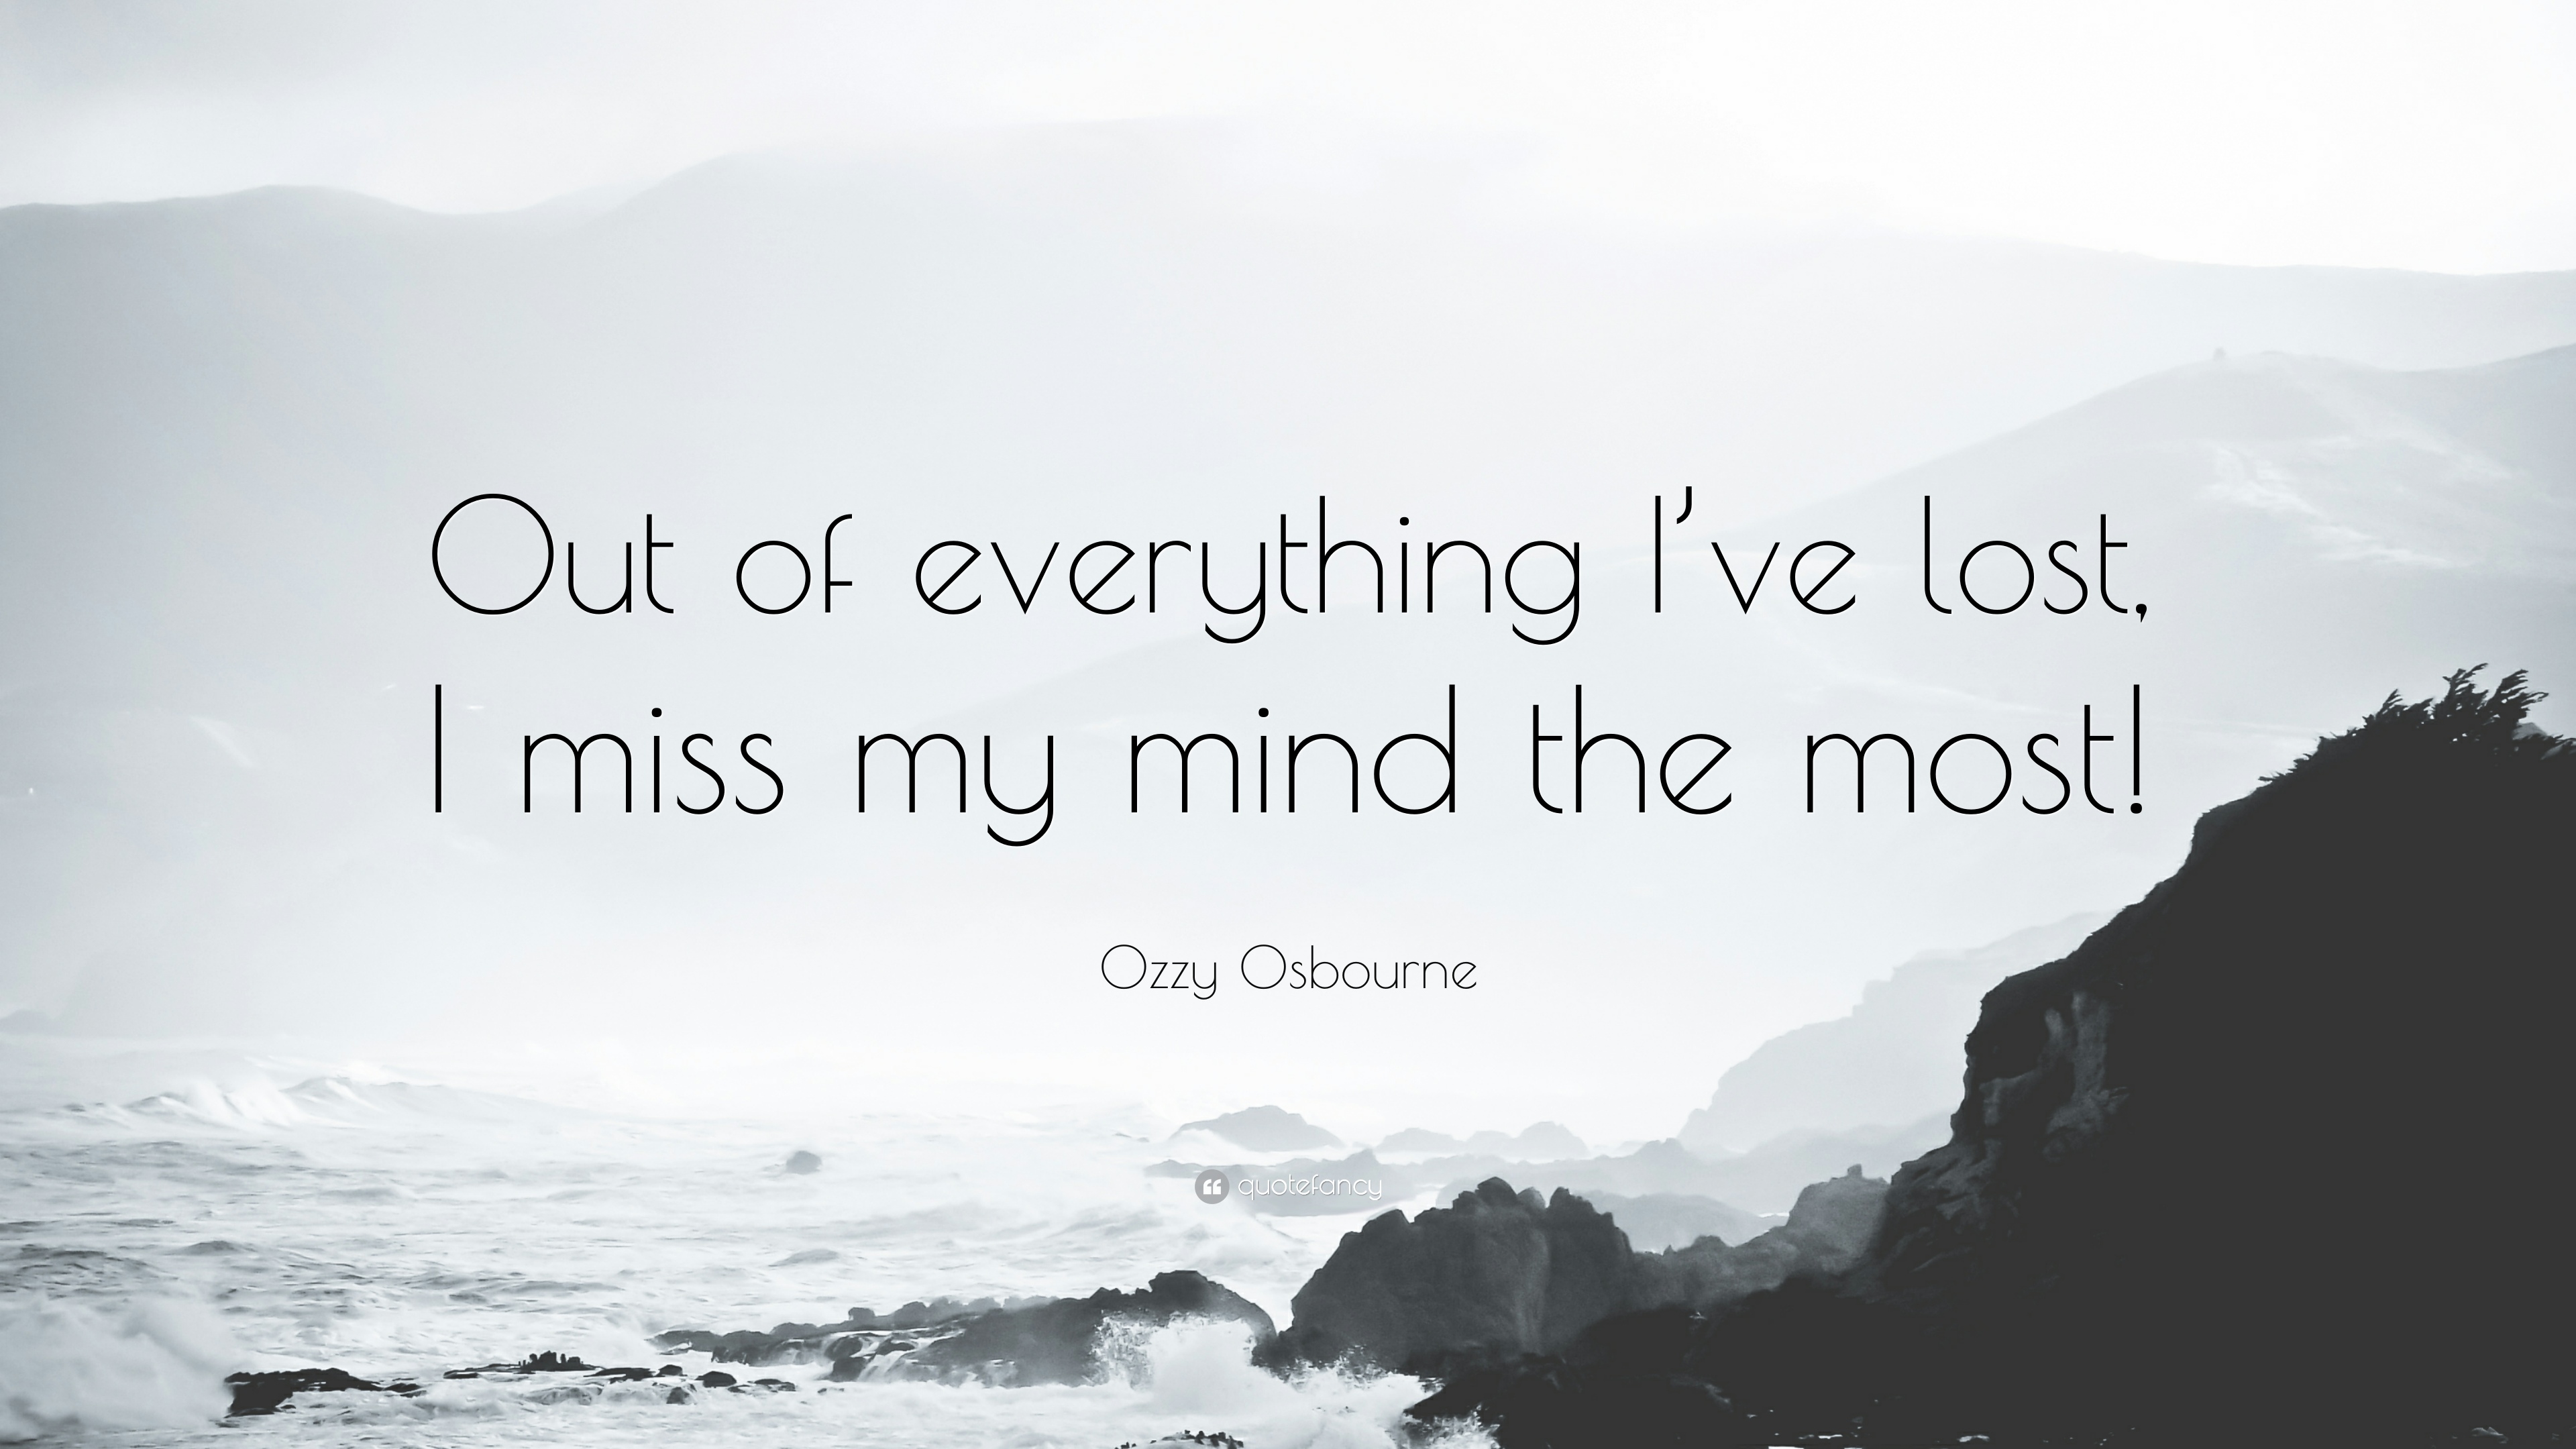 Ozzy Osbourne Quote: “Out of everything I've lost, I miss my mind the most!”